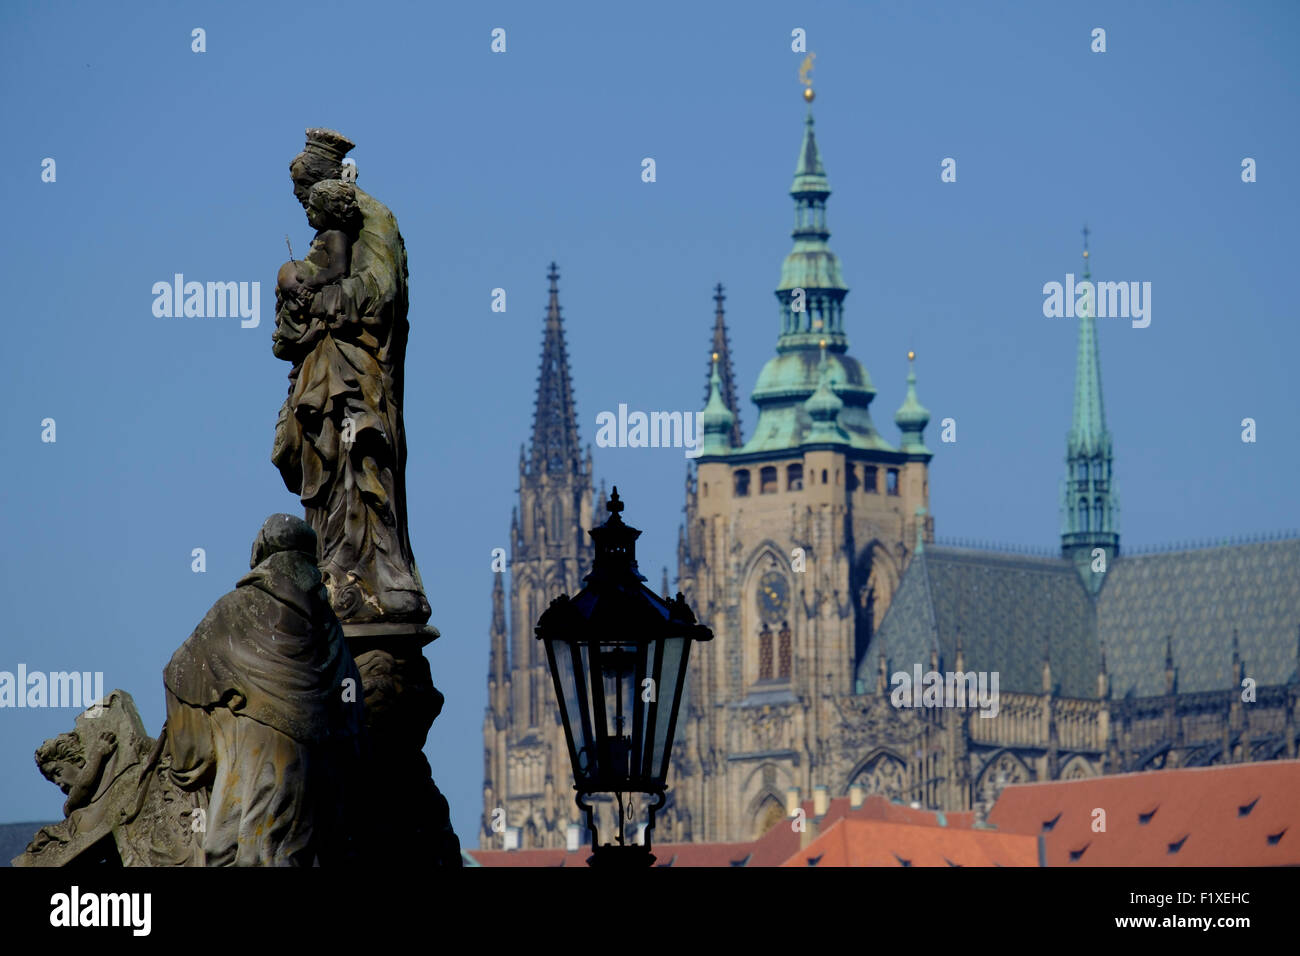 Statue on the Charles Bridge with the St. Vitus cathedral in the background, Prague, Czech Republic, Europe Stock Photo